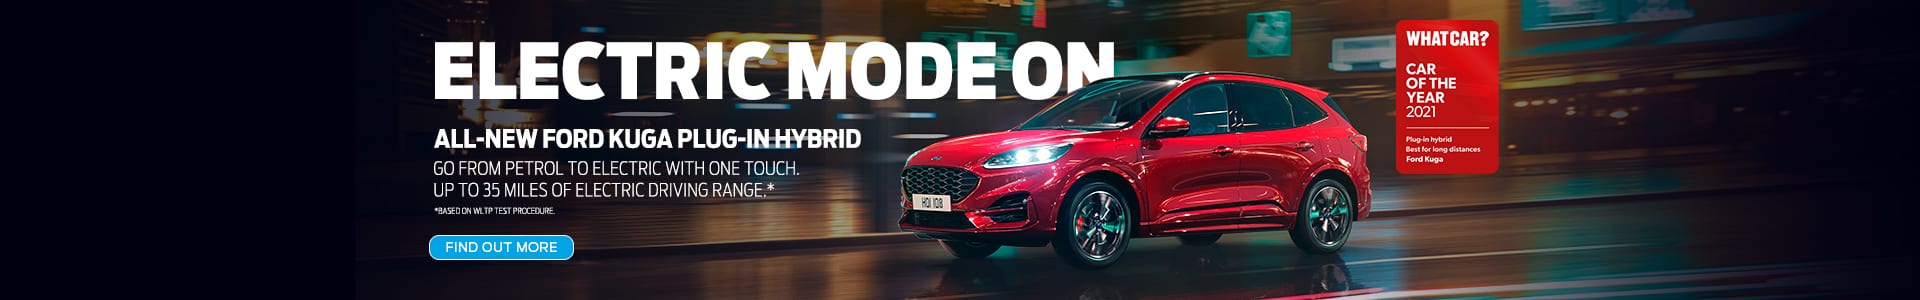 Electric Mode On! All-New Ford Kuga Plug-In Hybrid